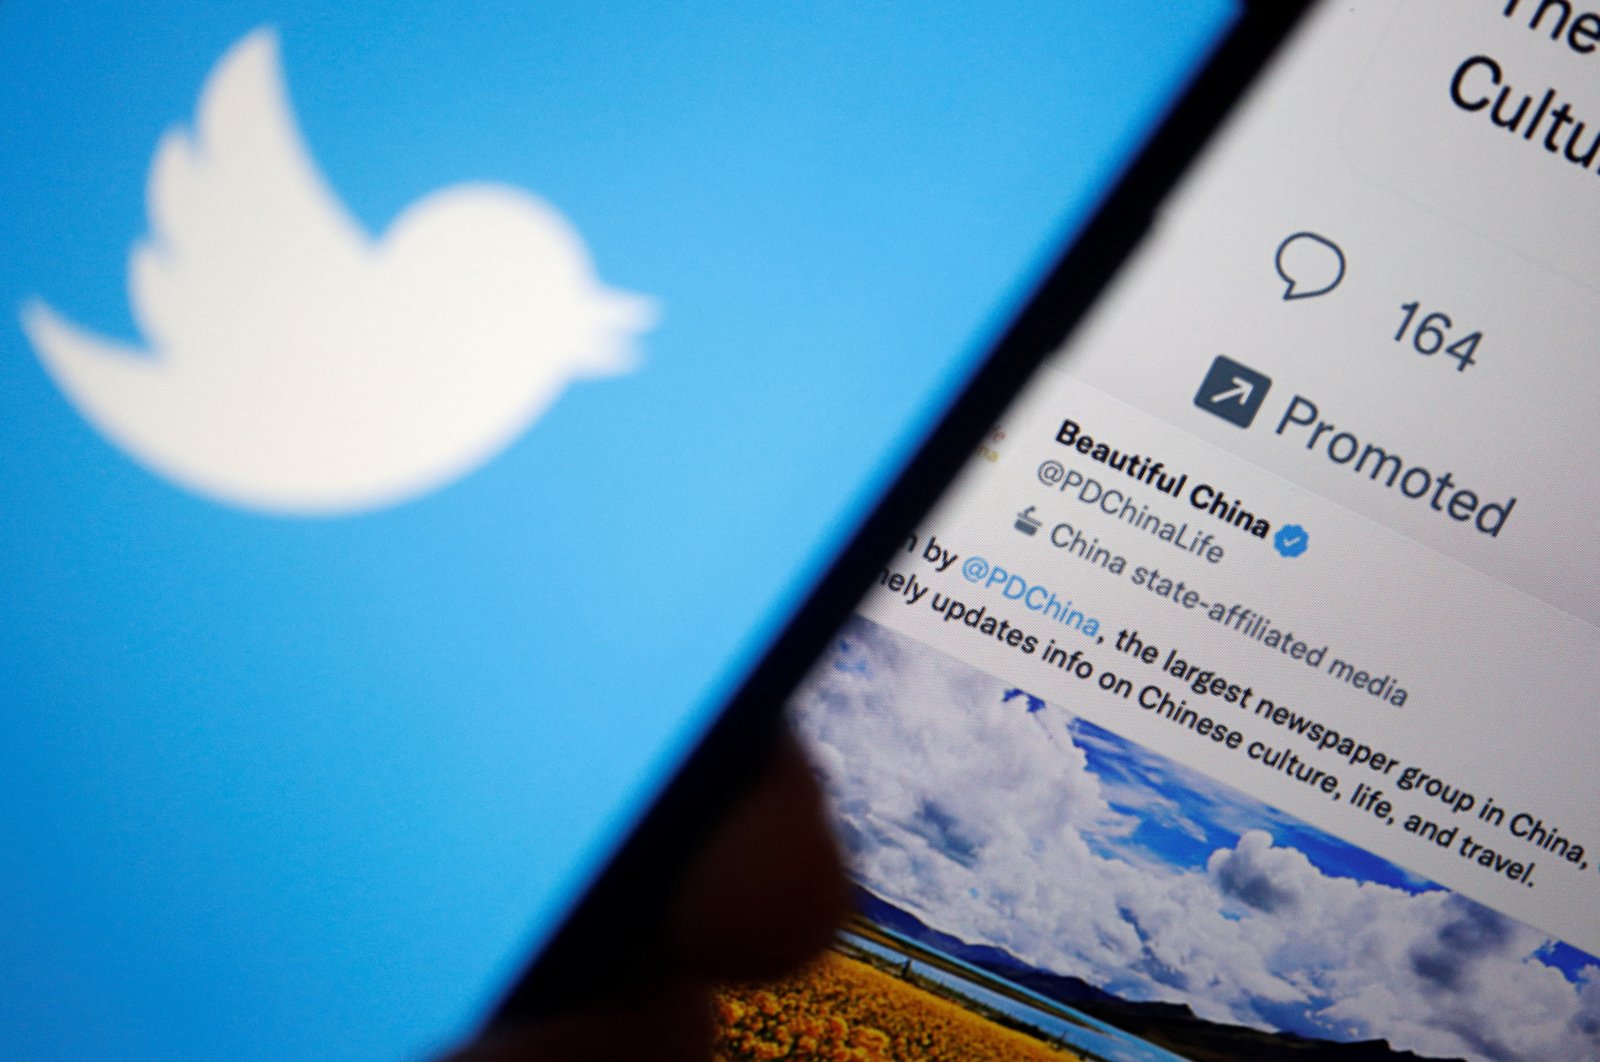 A Twitter logo is displayed on a mobile phone near a computer screen showing promoted tweets on China, in this illustration picture taken Sept. 8, 2022. (Reuters Photo)